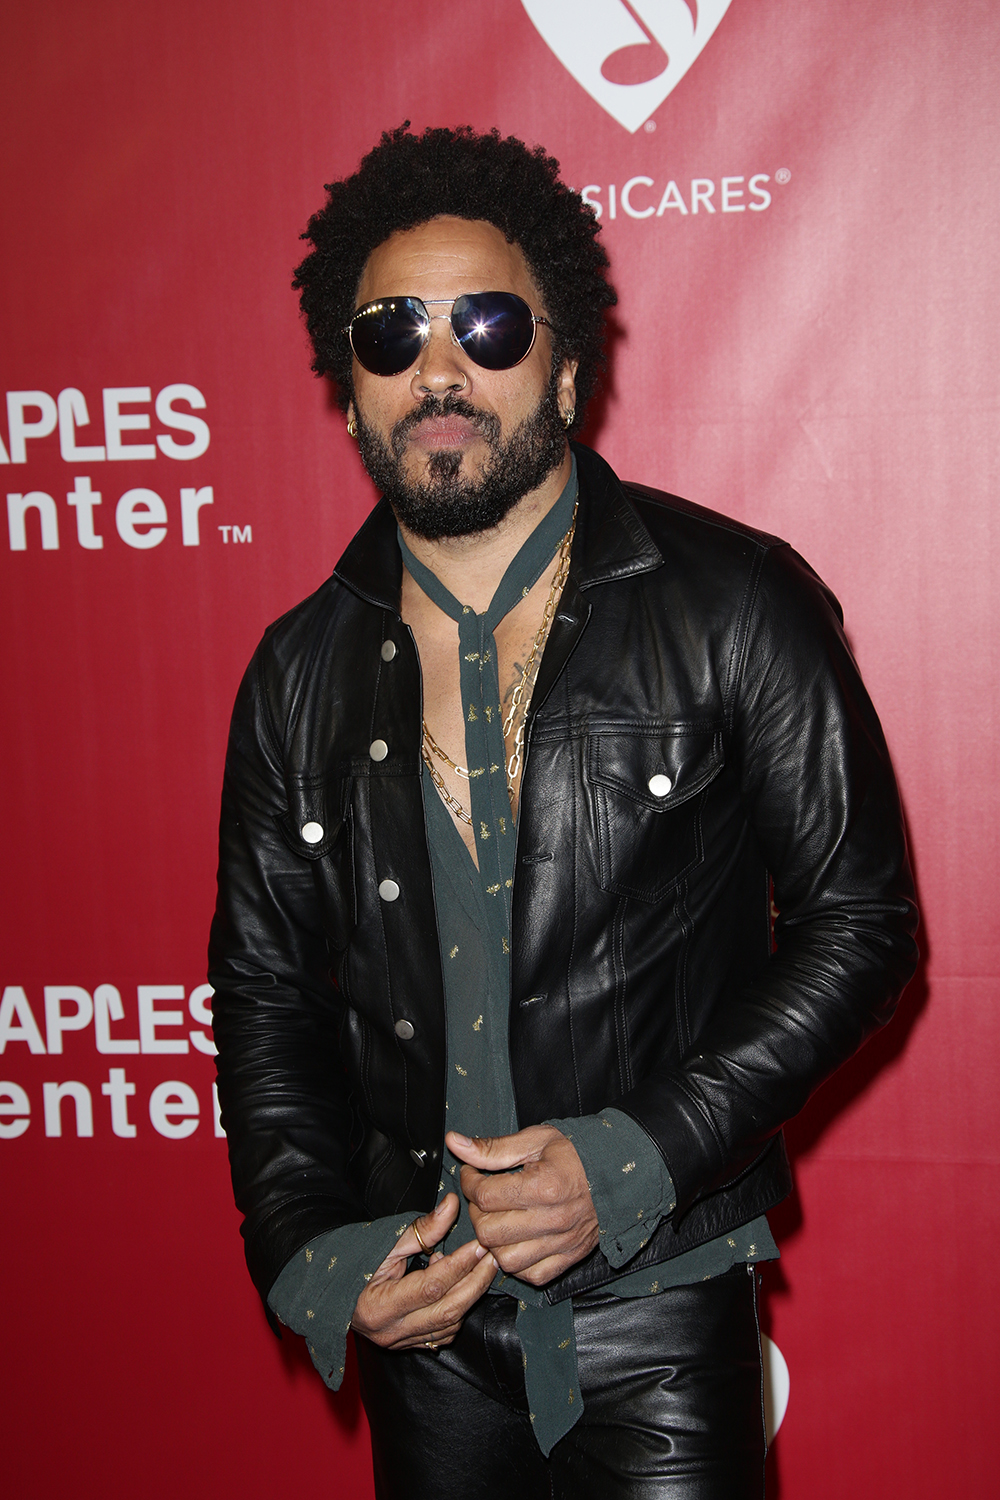 <p>Lenny Kravitz at the MusiCares Person of the Year Gala in 2016. He wore a scarf which matched his shirt.</p>